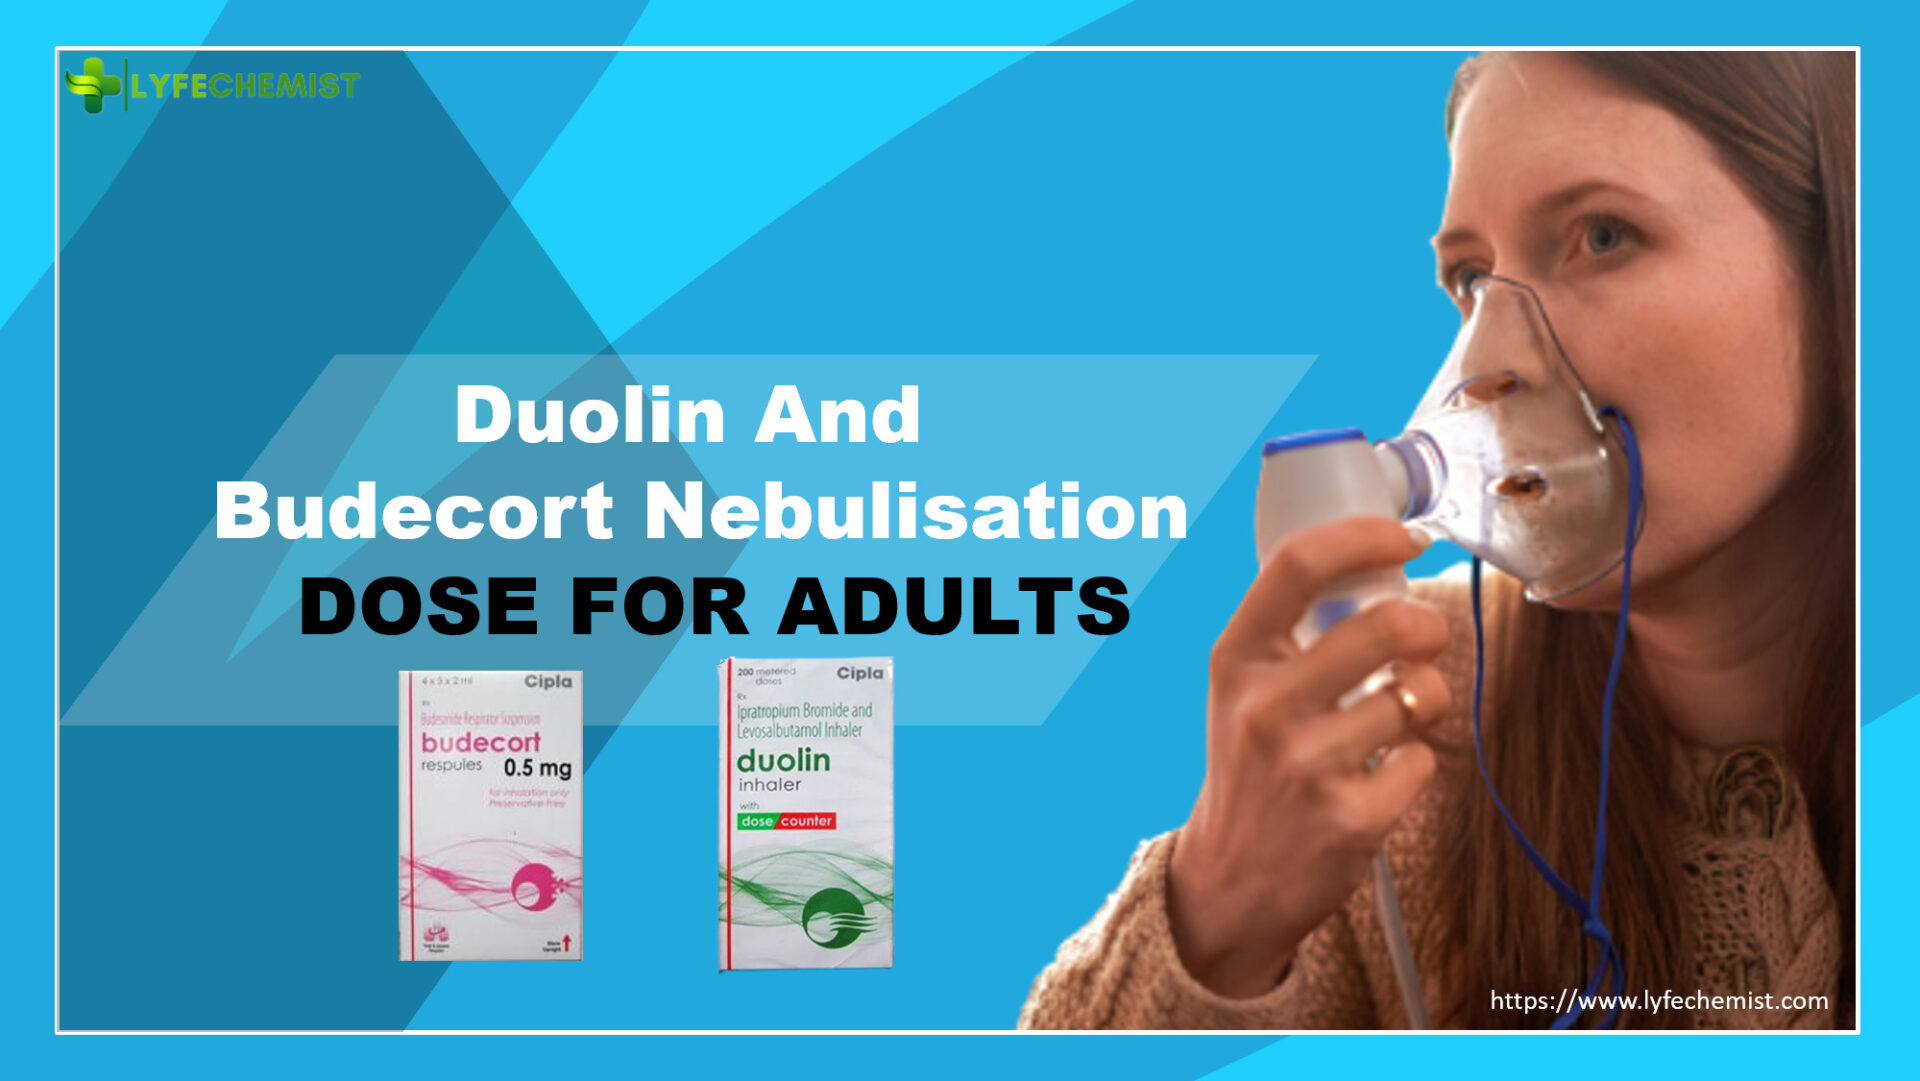 Duolin and Budecort nebulisation dose for Adults